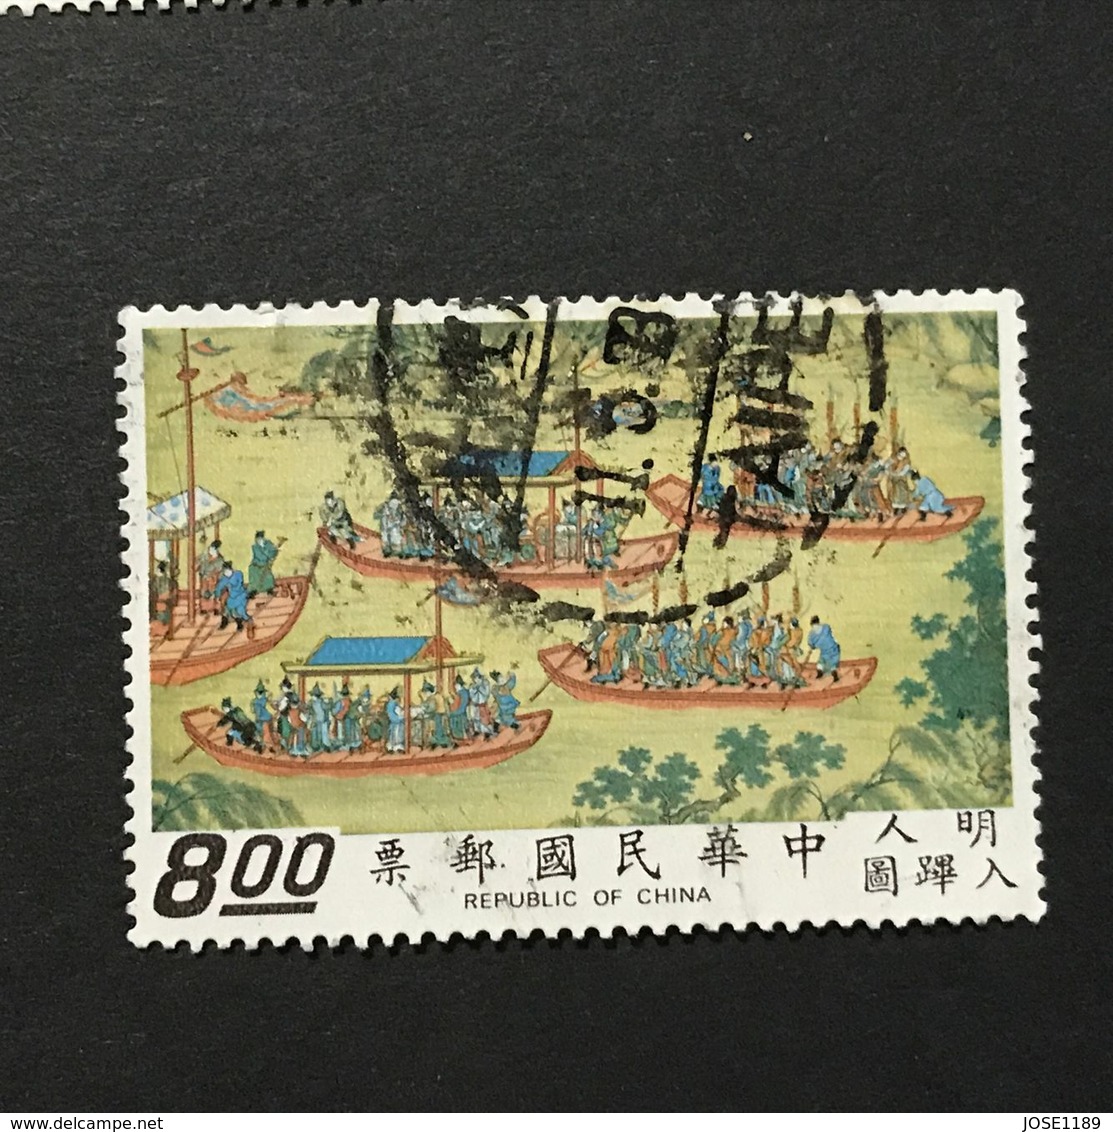 ◆◆◆Taiwán (Formosa)  1972  Emperor Shih-tsung’s Procession      $8   USED   AA2311 - Used Stamps